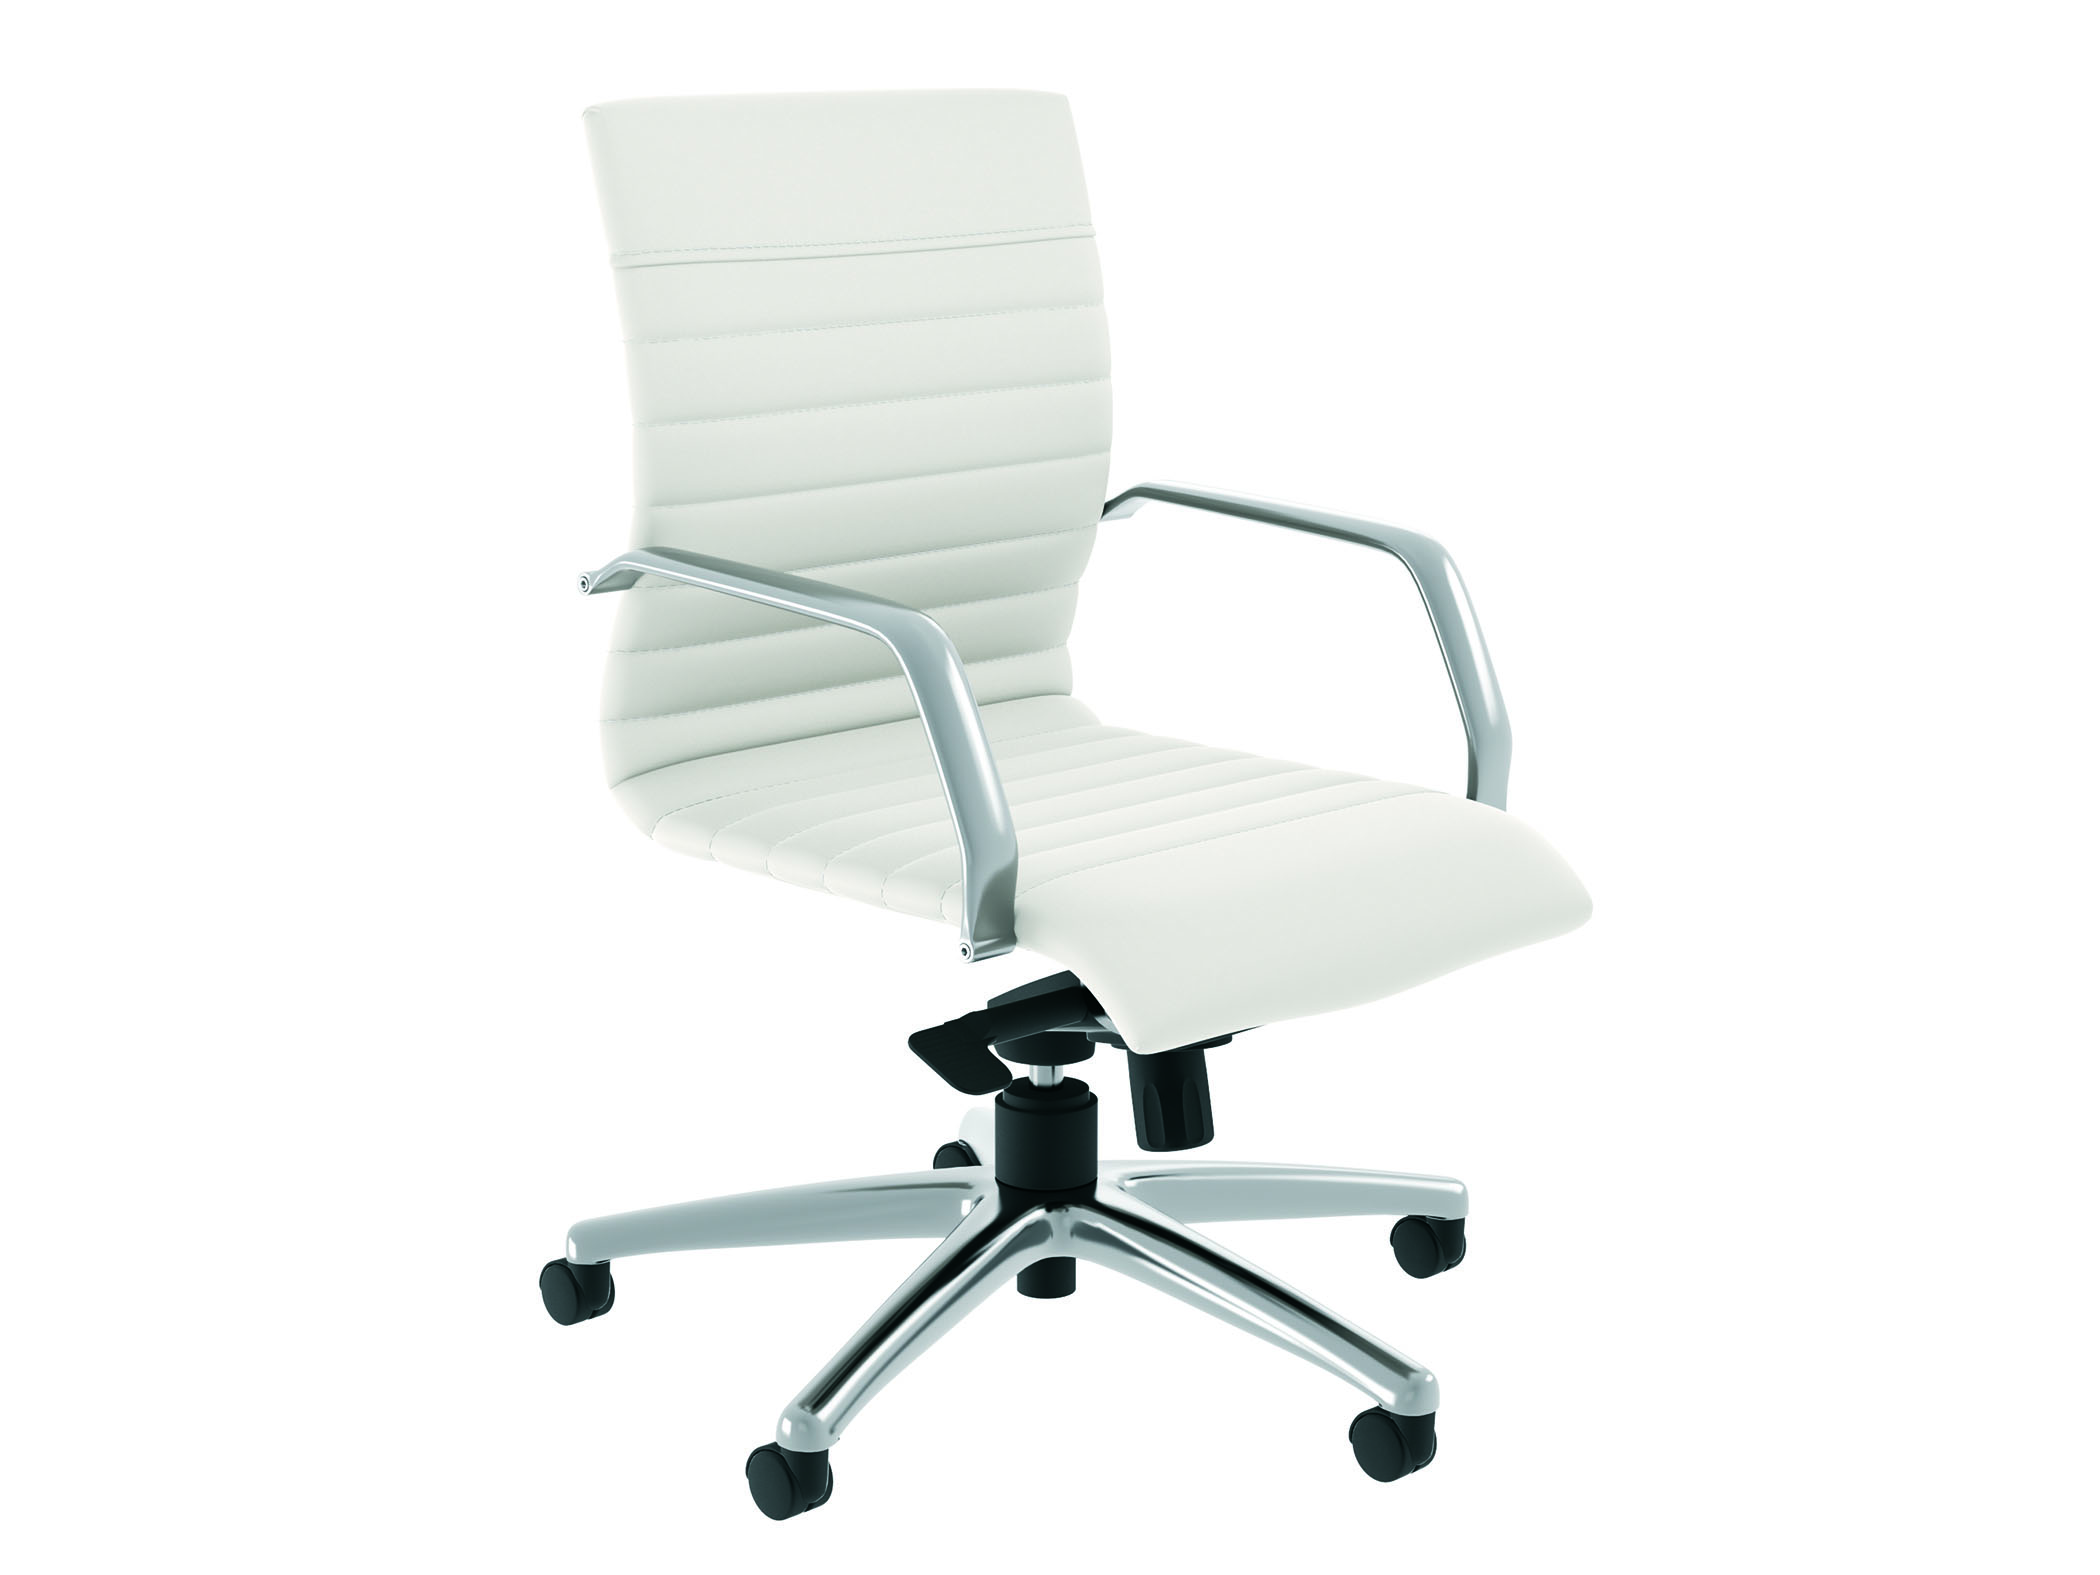 Executive Furniture from Compel - Mojo conference chair